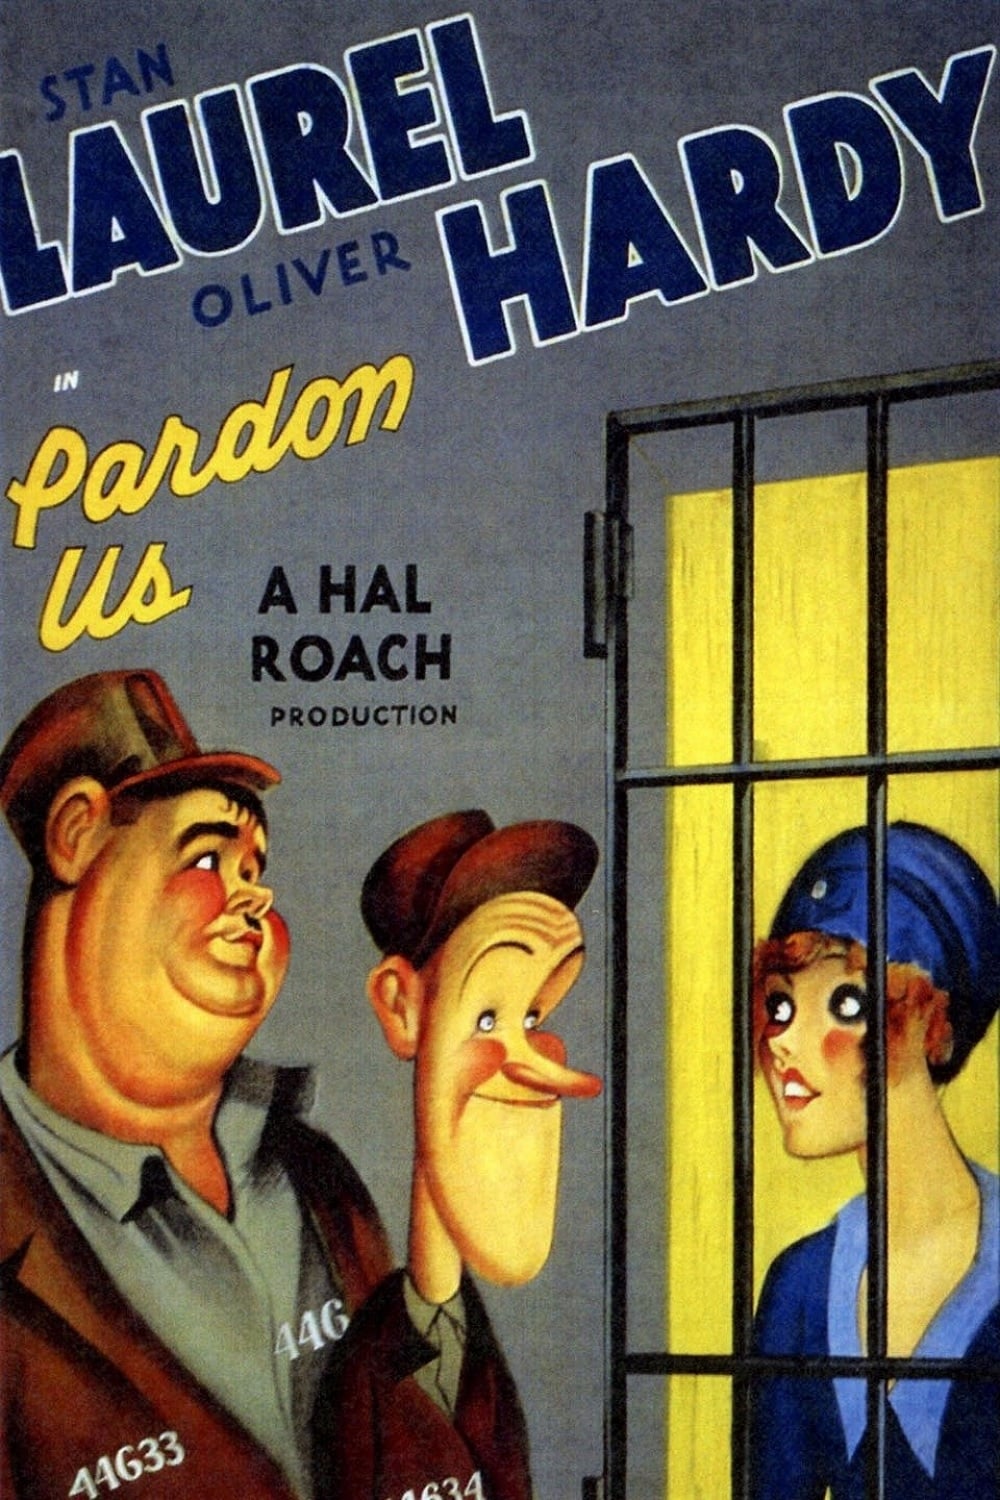 Poster for the movie "Pardon Us"